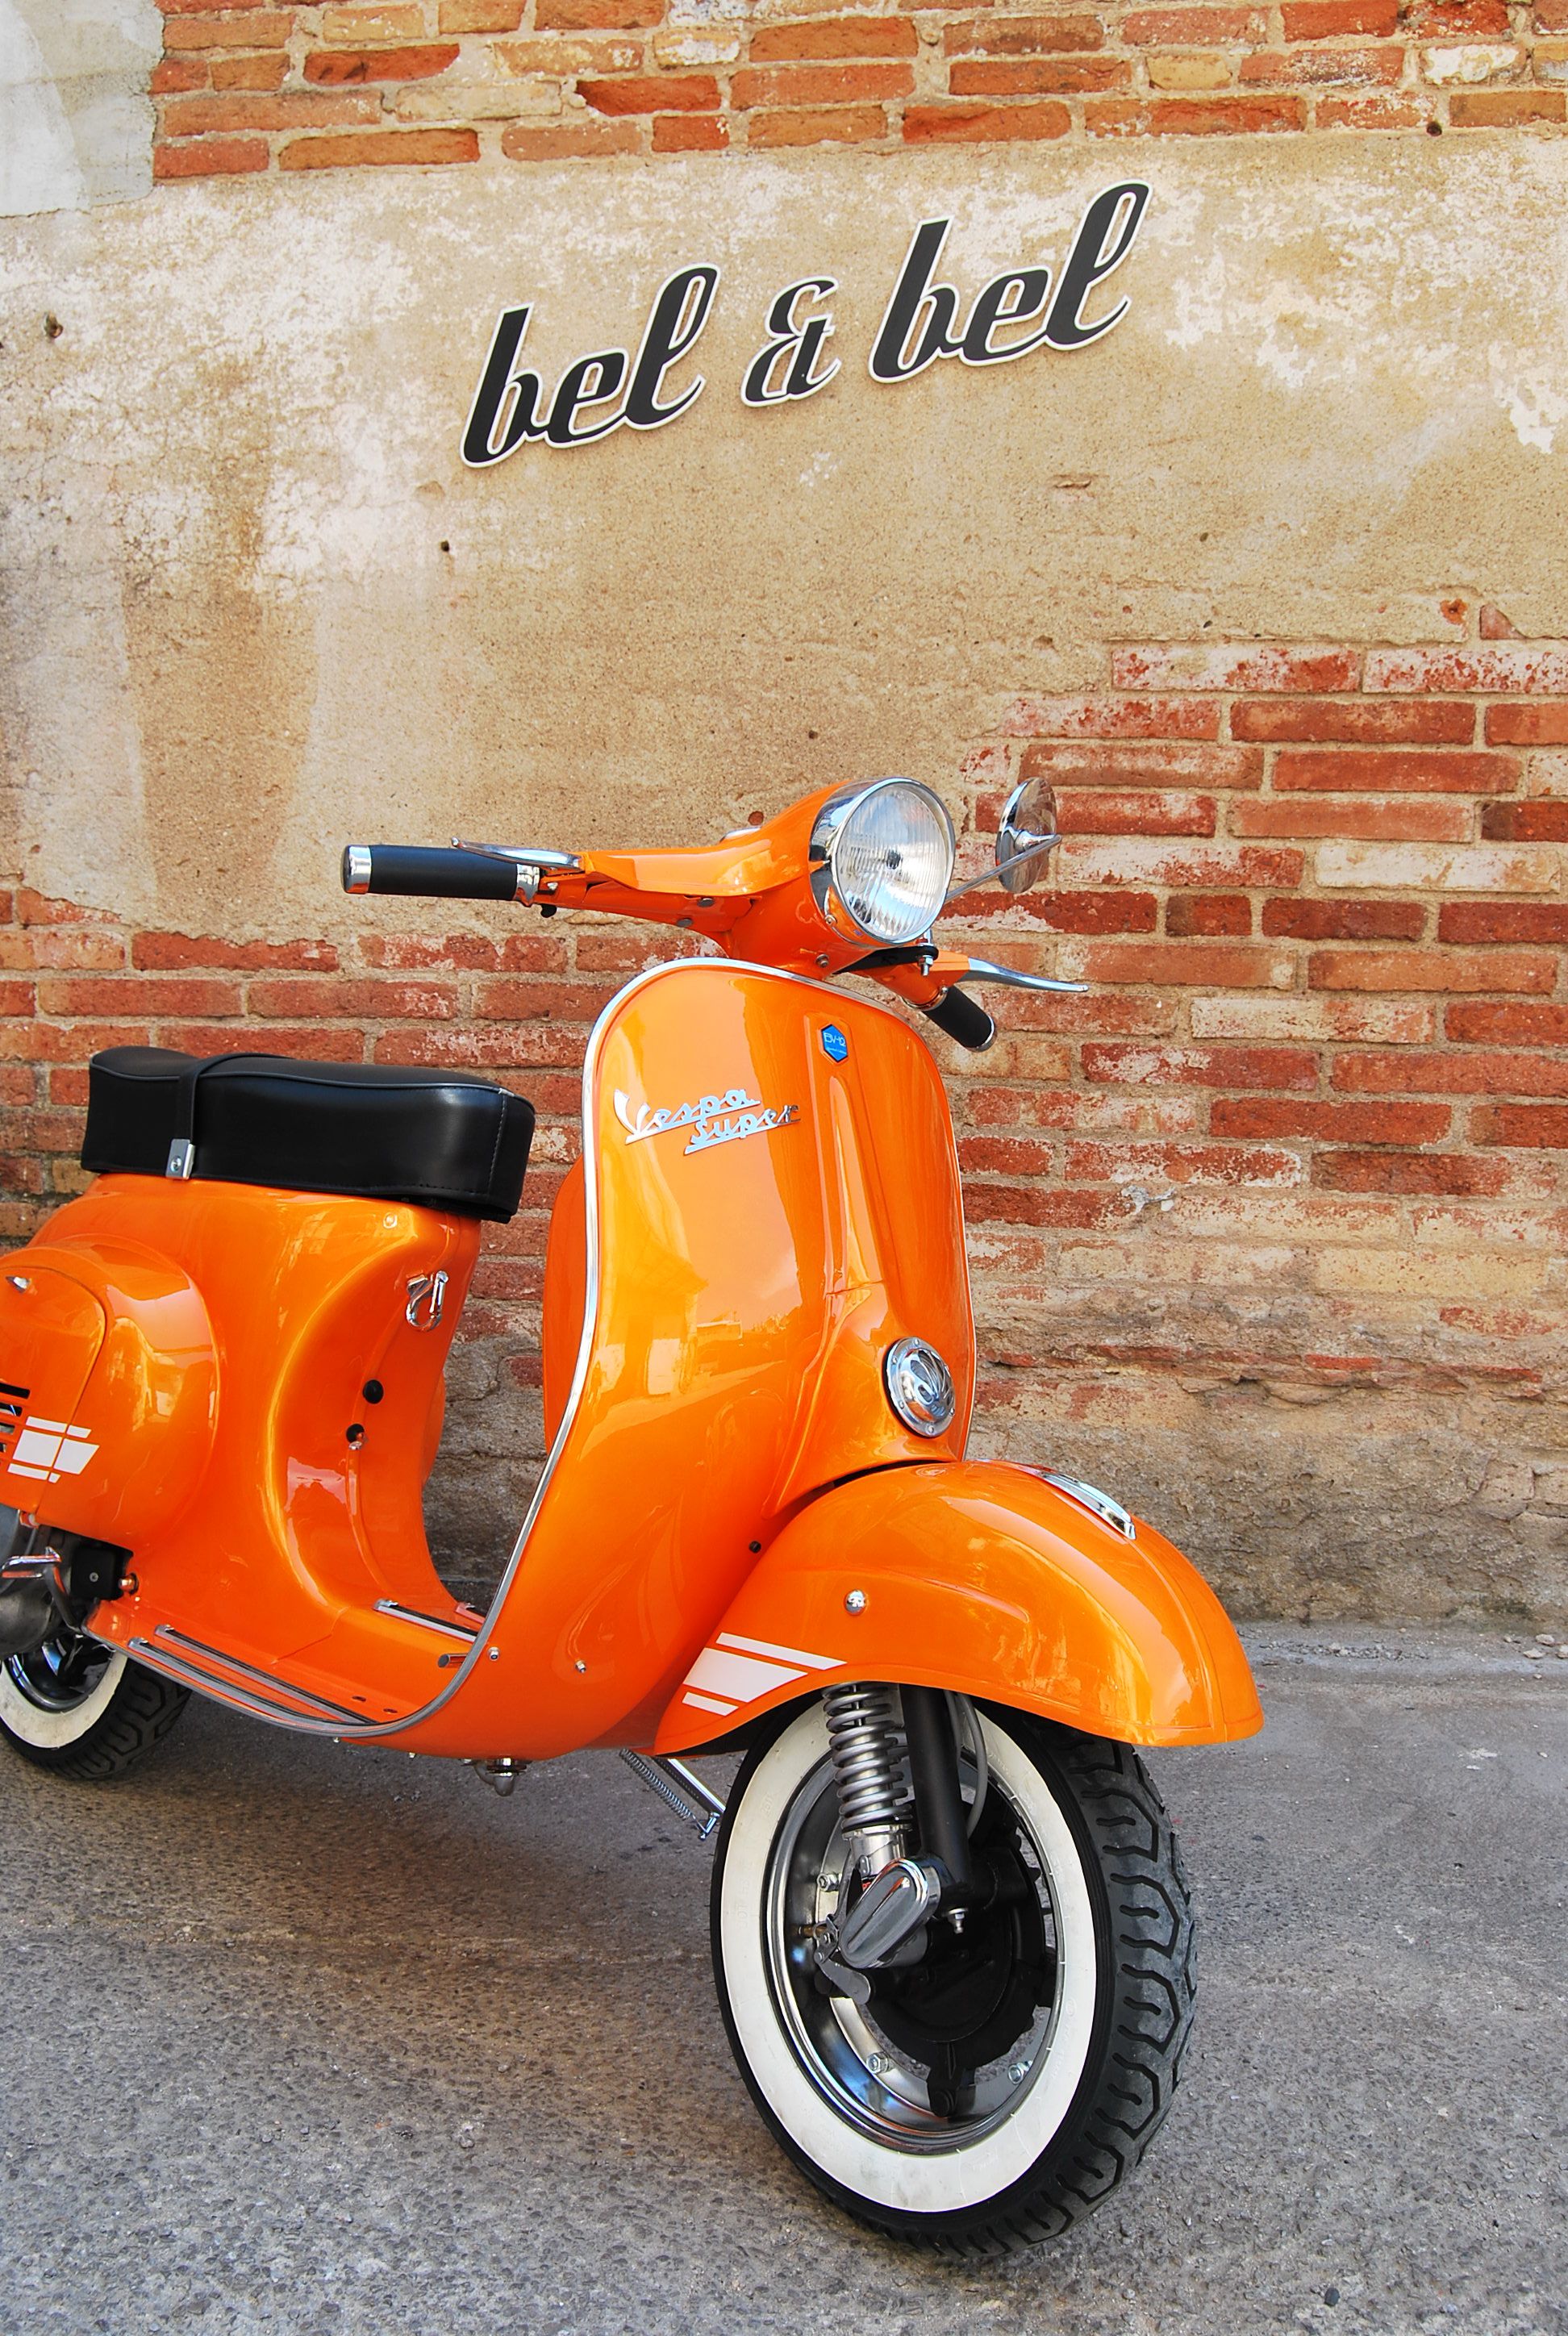 An orange Vespa! Love! I also adore the font of thebel